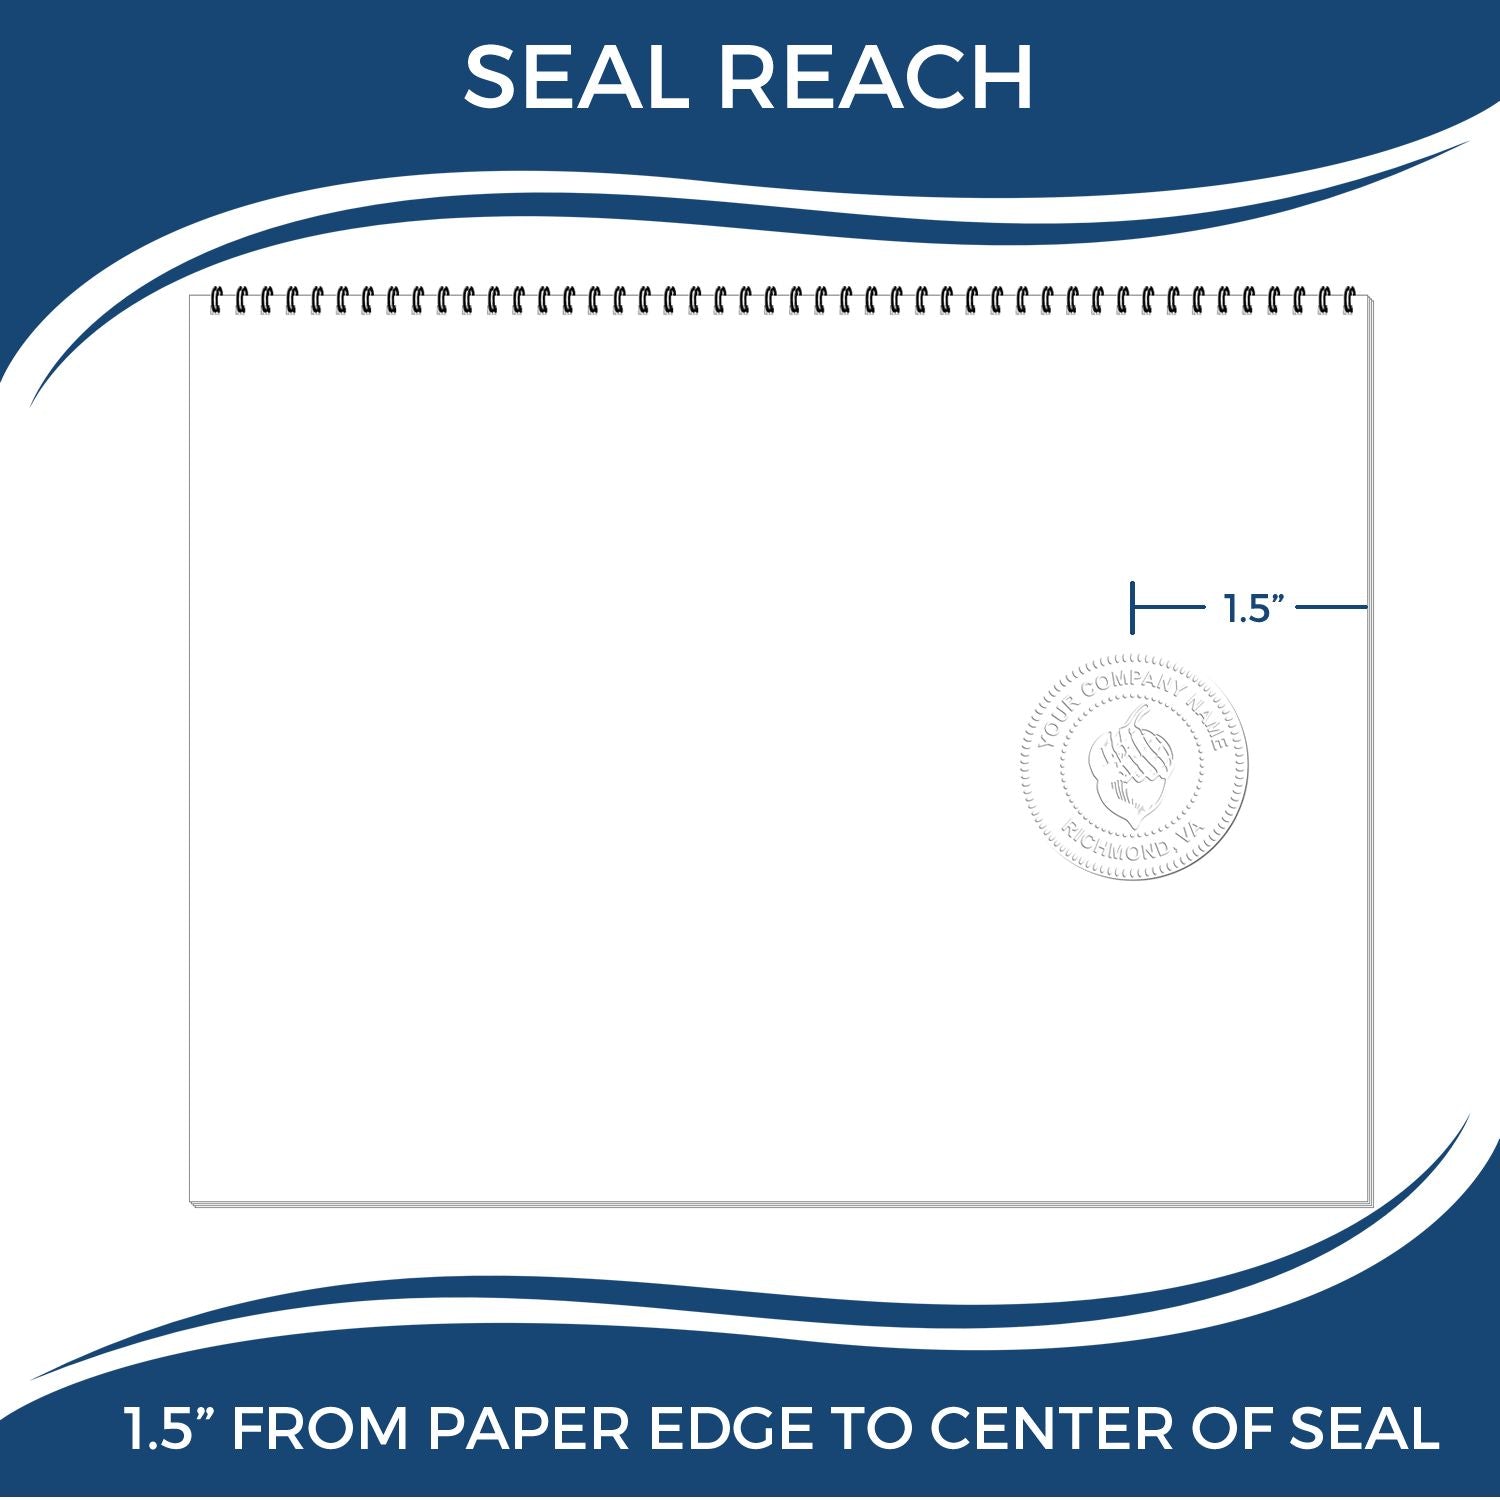 An infographic showing the seal reach which is represented by a ruler and a miniature seal image of the Handheld New Mexico Land Surveyor Seal